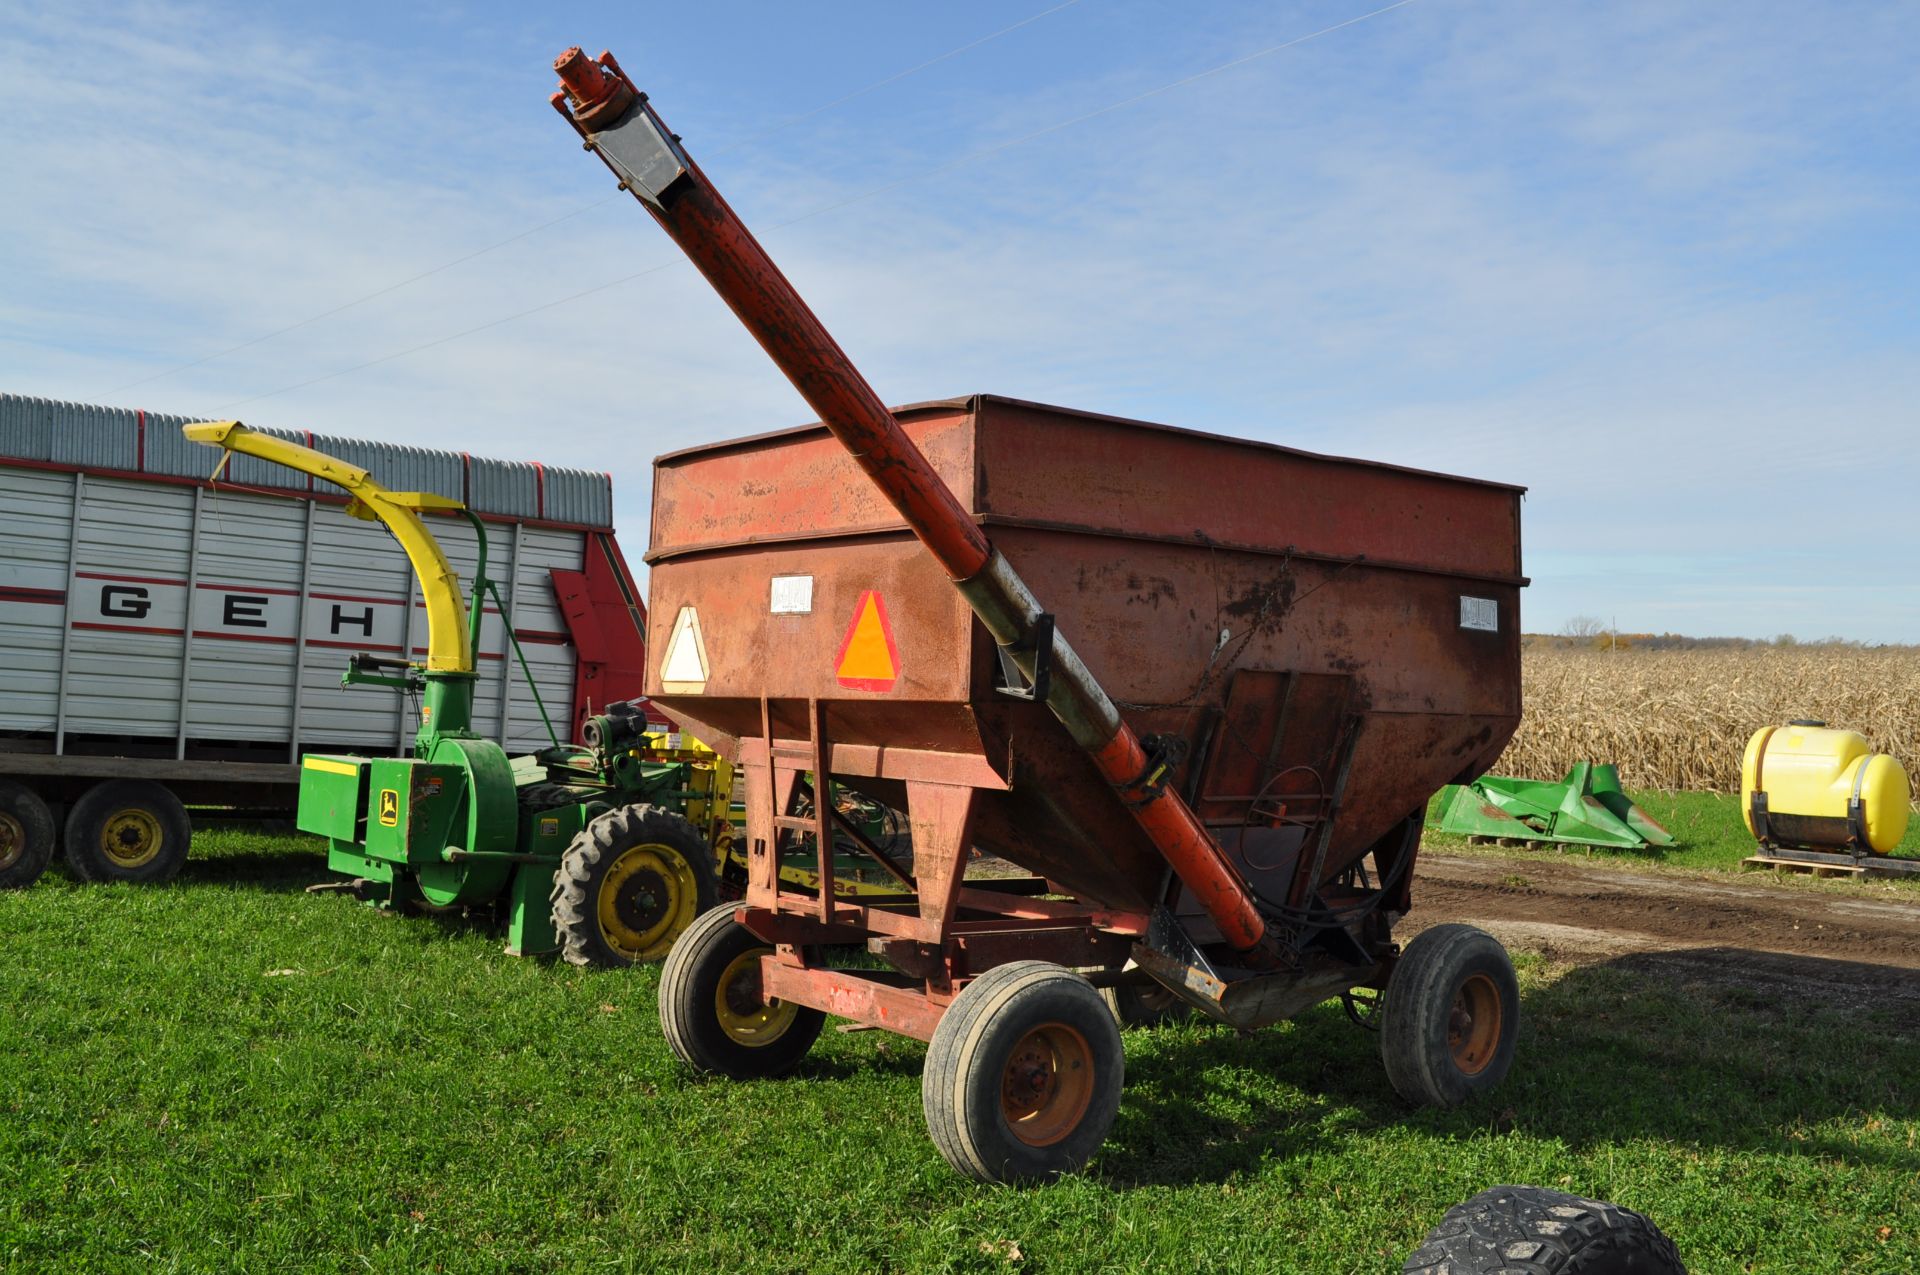 McCurdy 350 gravity wagon on gear, 14’ hydr fertilizer auger, 11L-15 tires - Image 3 of 11